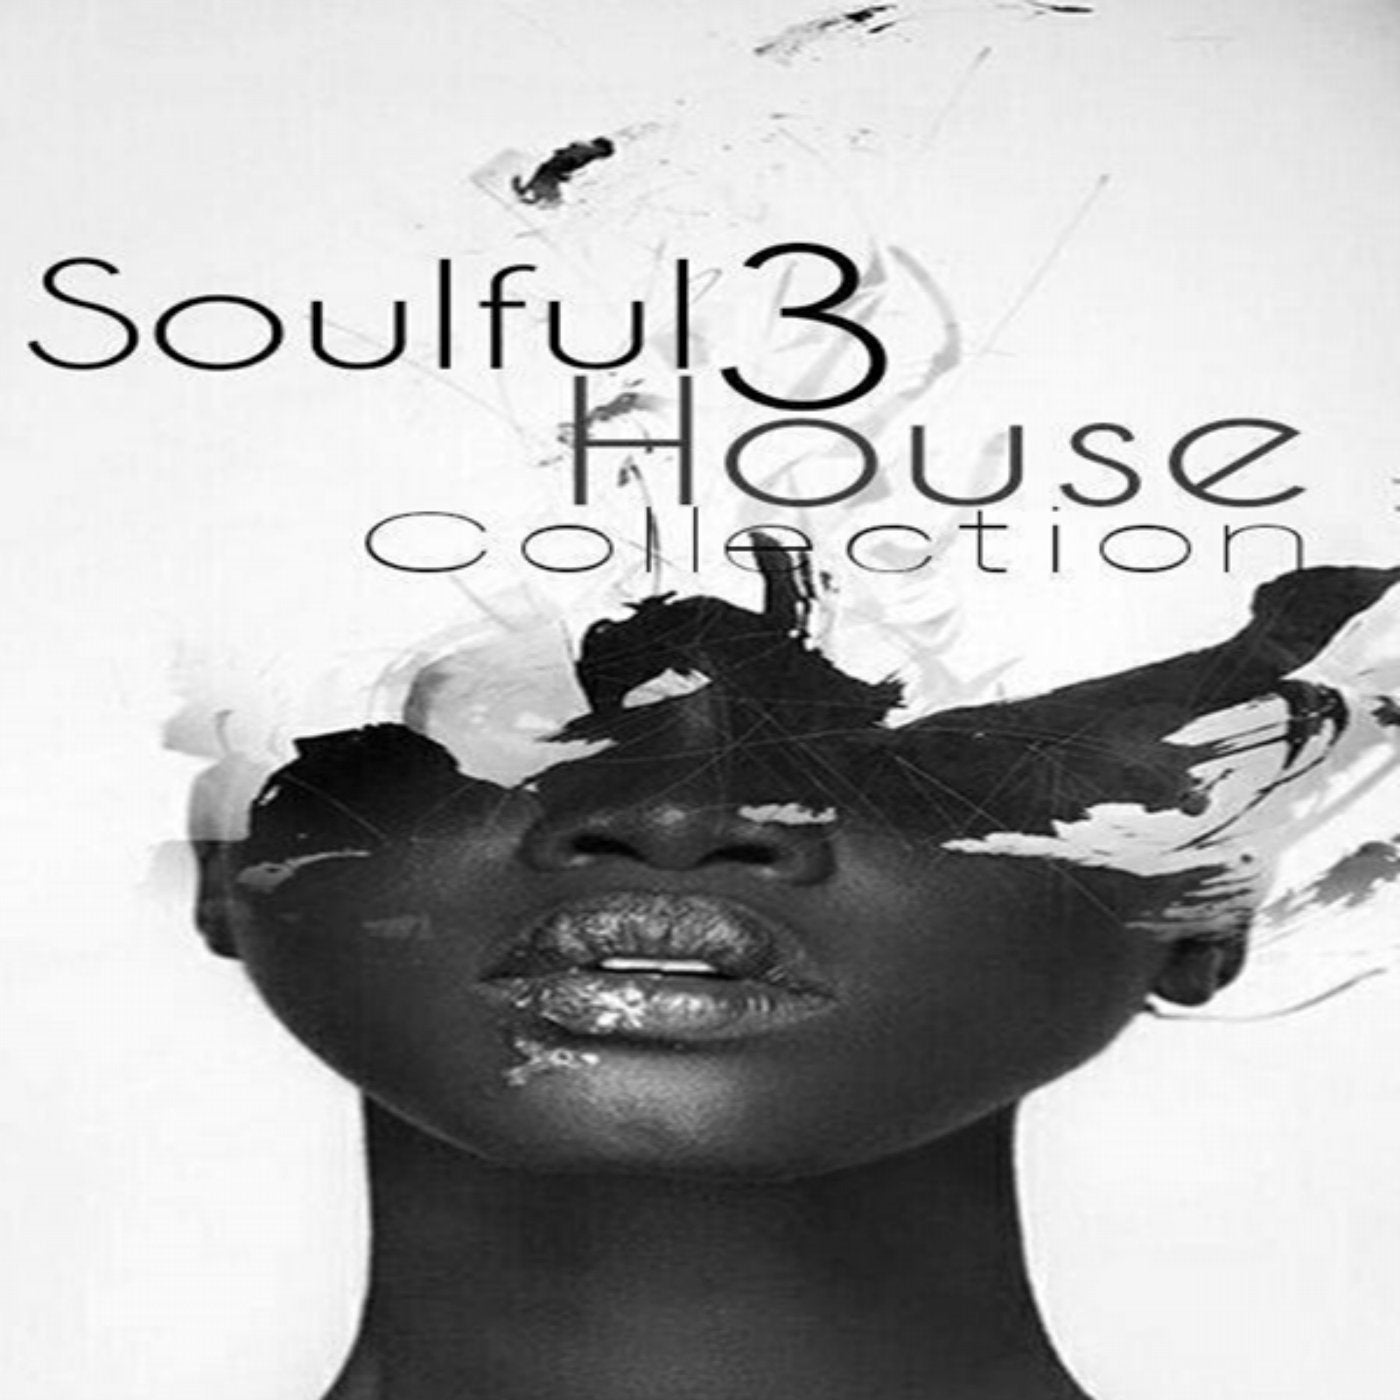 Soulful House Collection Vol. 3